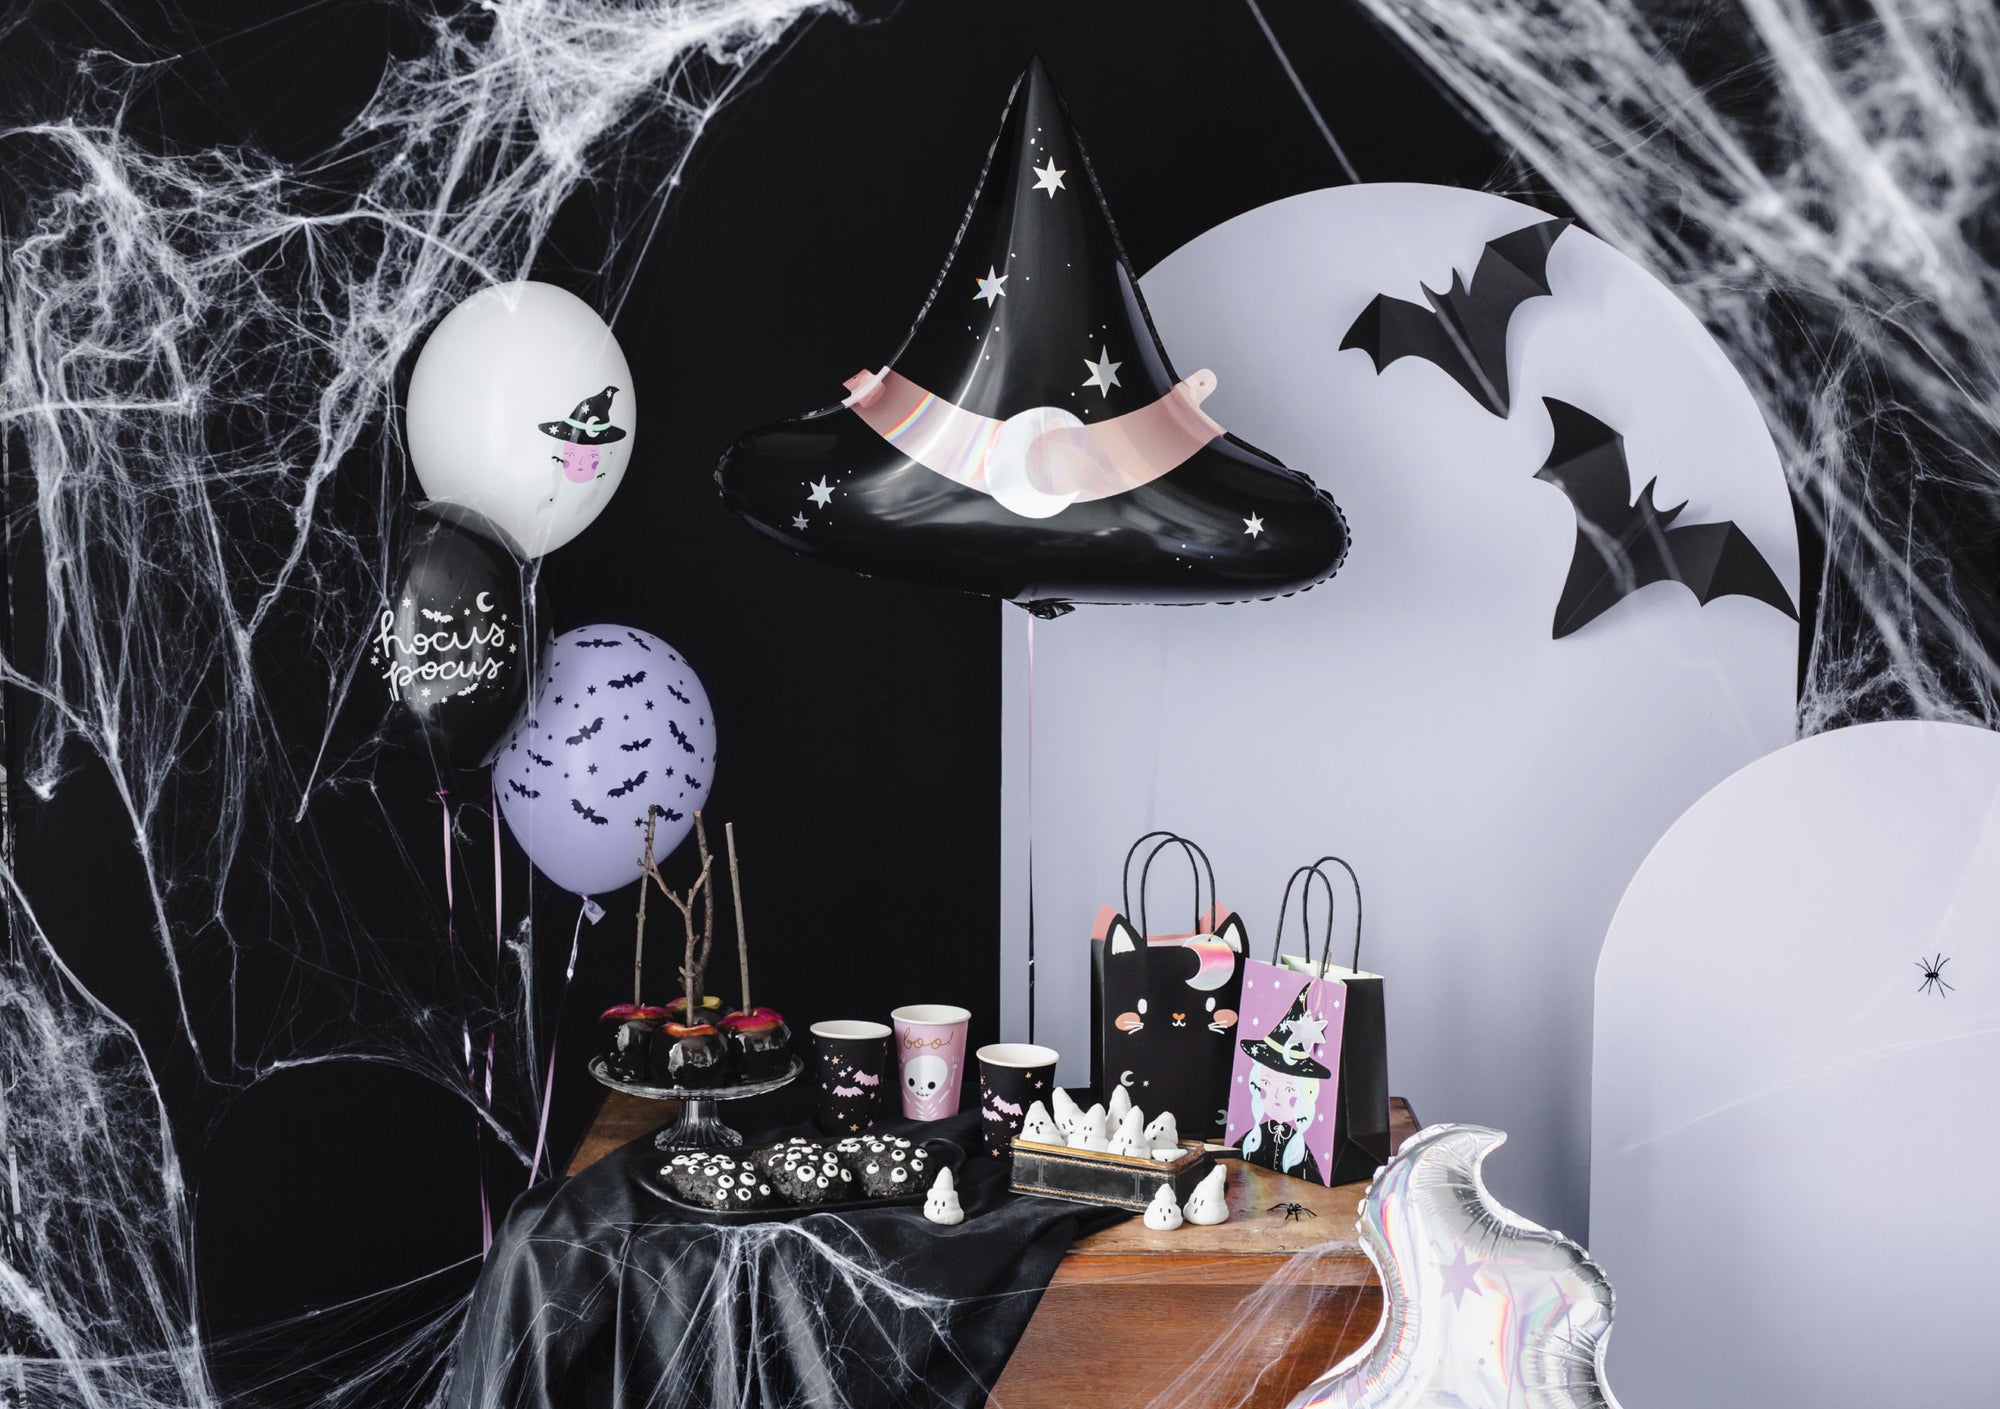 Halloween Witch Balloon Bouquet 6ct | The Party Darling